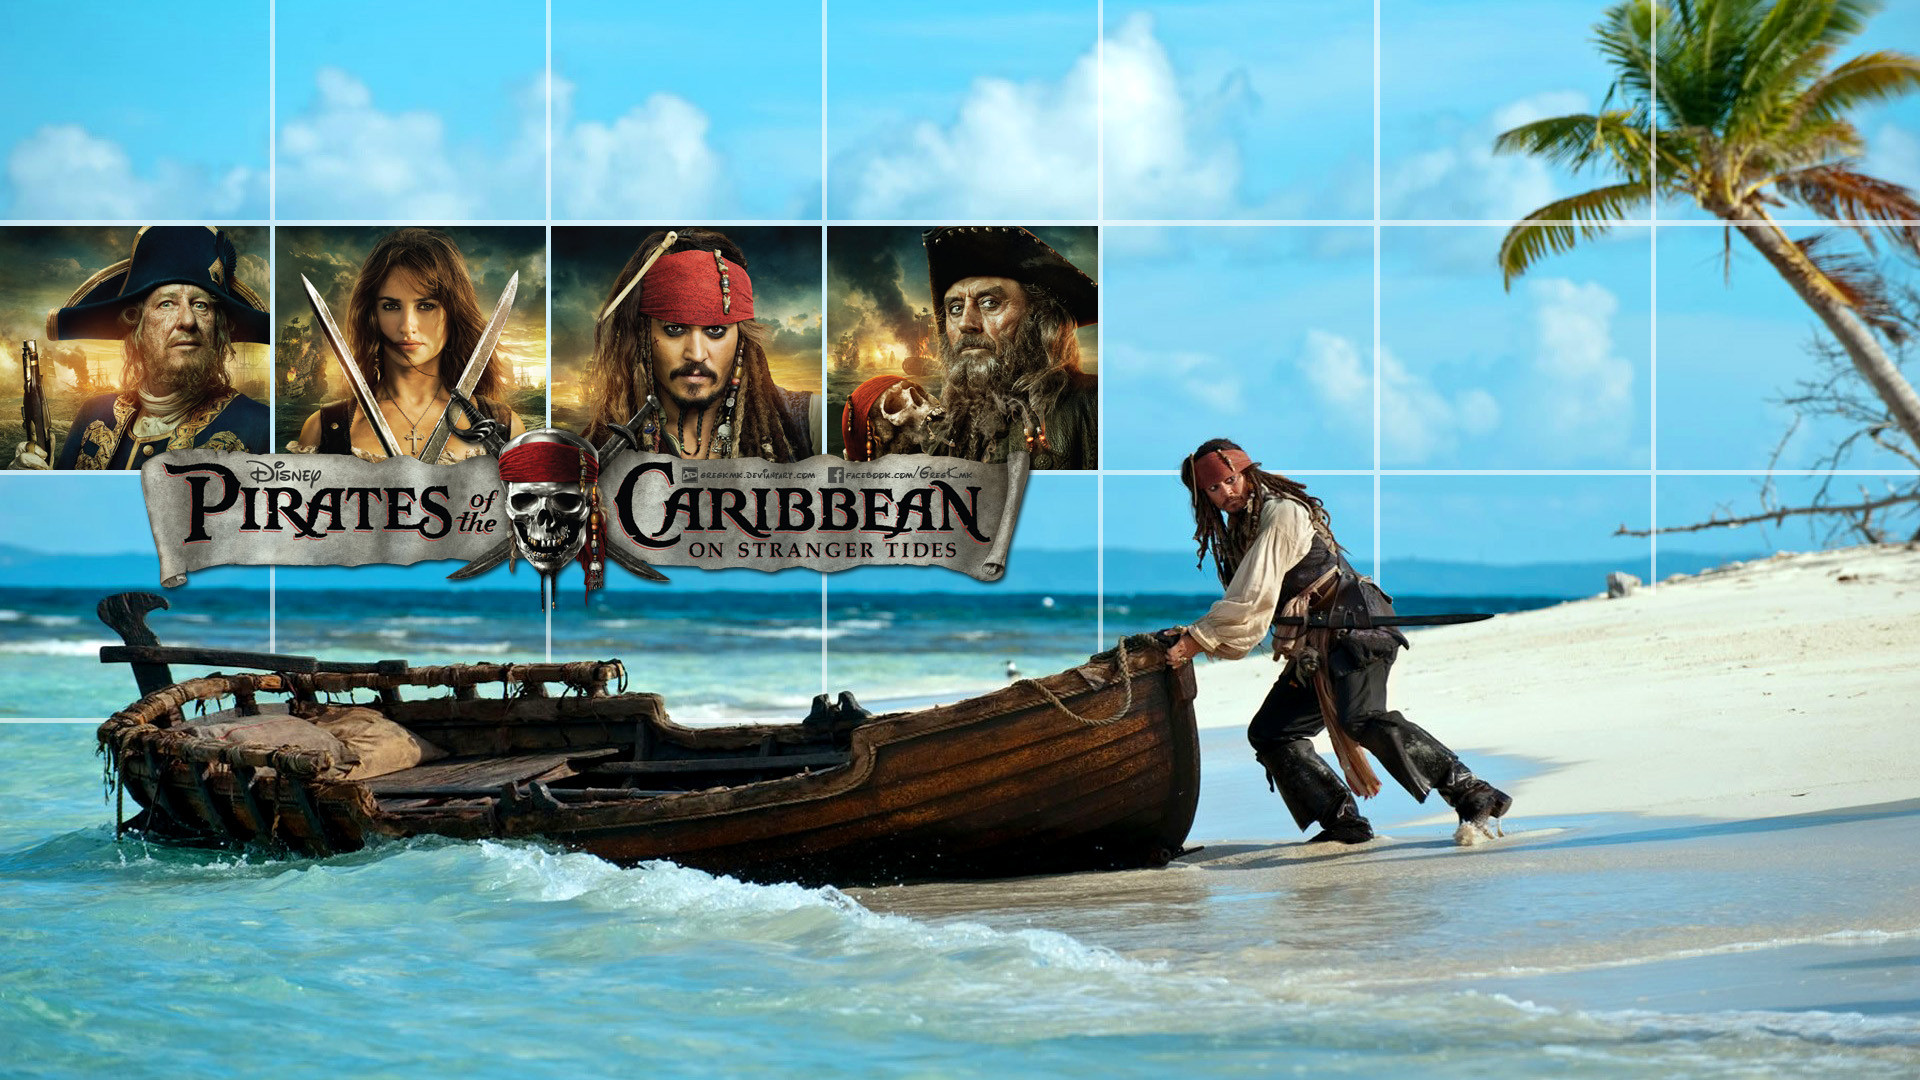 1920x1080 ... Pirates of the Caribbean Wallpaper 2 by GregKmk